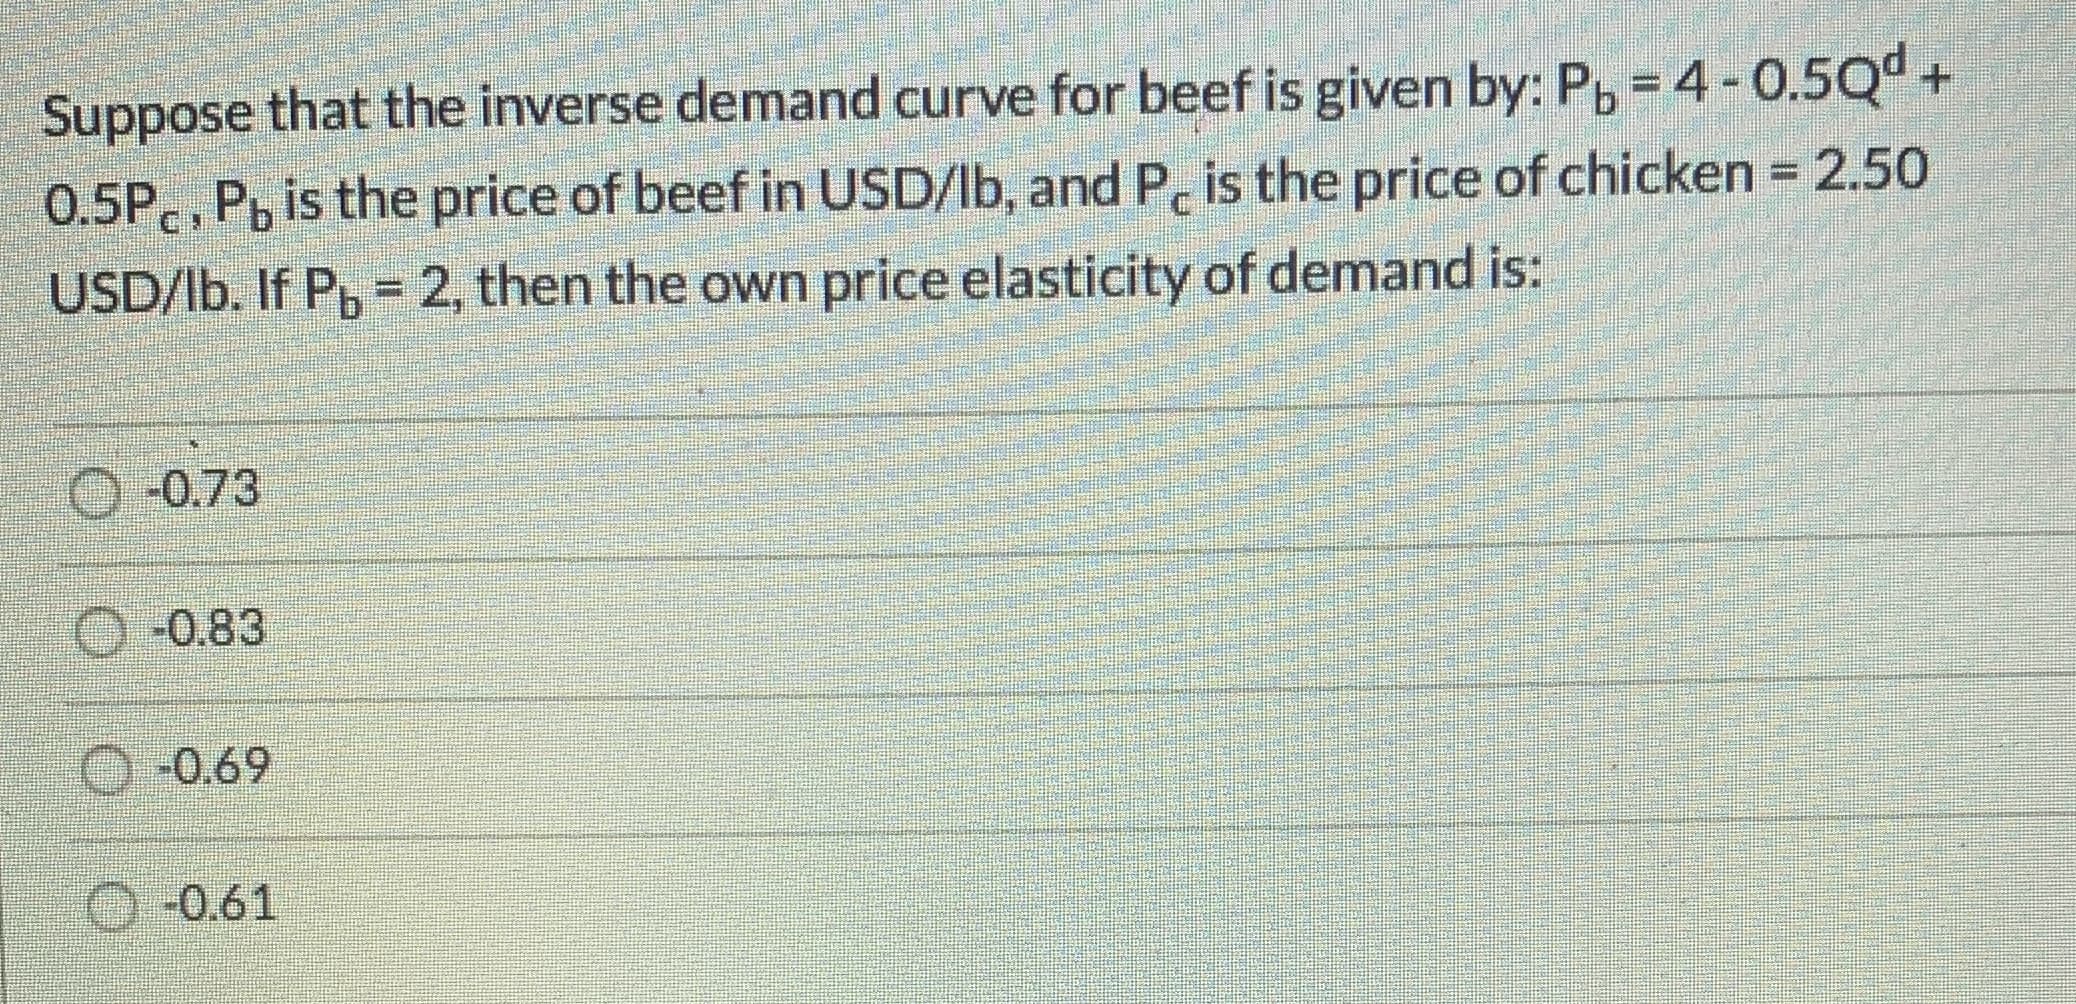 Suppose that the inverse demand curve for beef is given by: P, =4-0.5Qd +
0.5P., Pb is the price of beef in USD/Ib, and P, is the price of chicken = 2.50
USD/lb. If P, = 2, then the own price elasticity of demand is:
